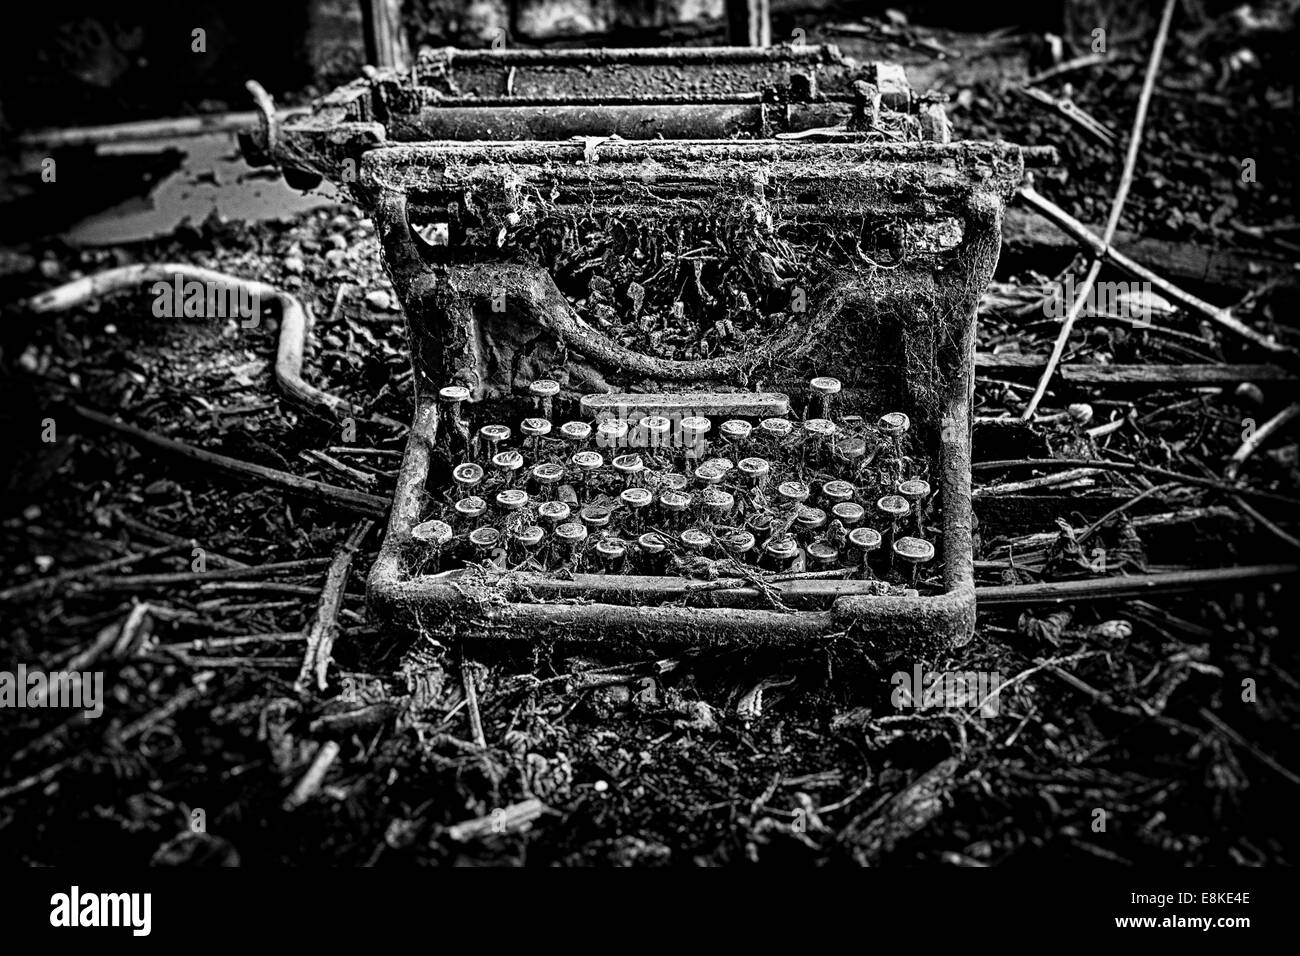 An abandoned and broken, antique, vintage typewriter, left outdoors with weeds and grass growing over it. In black and white. Stock Photo